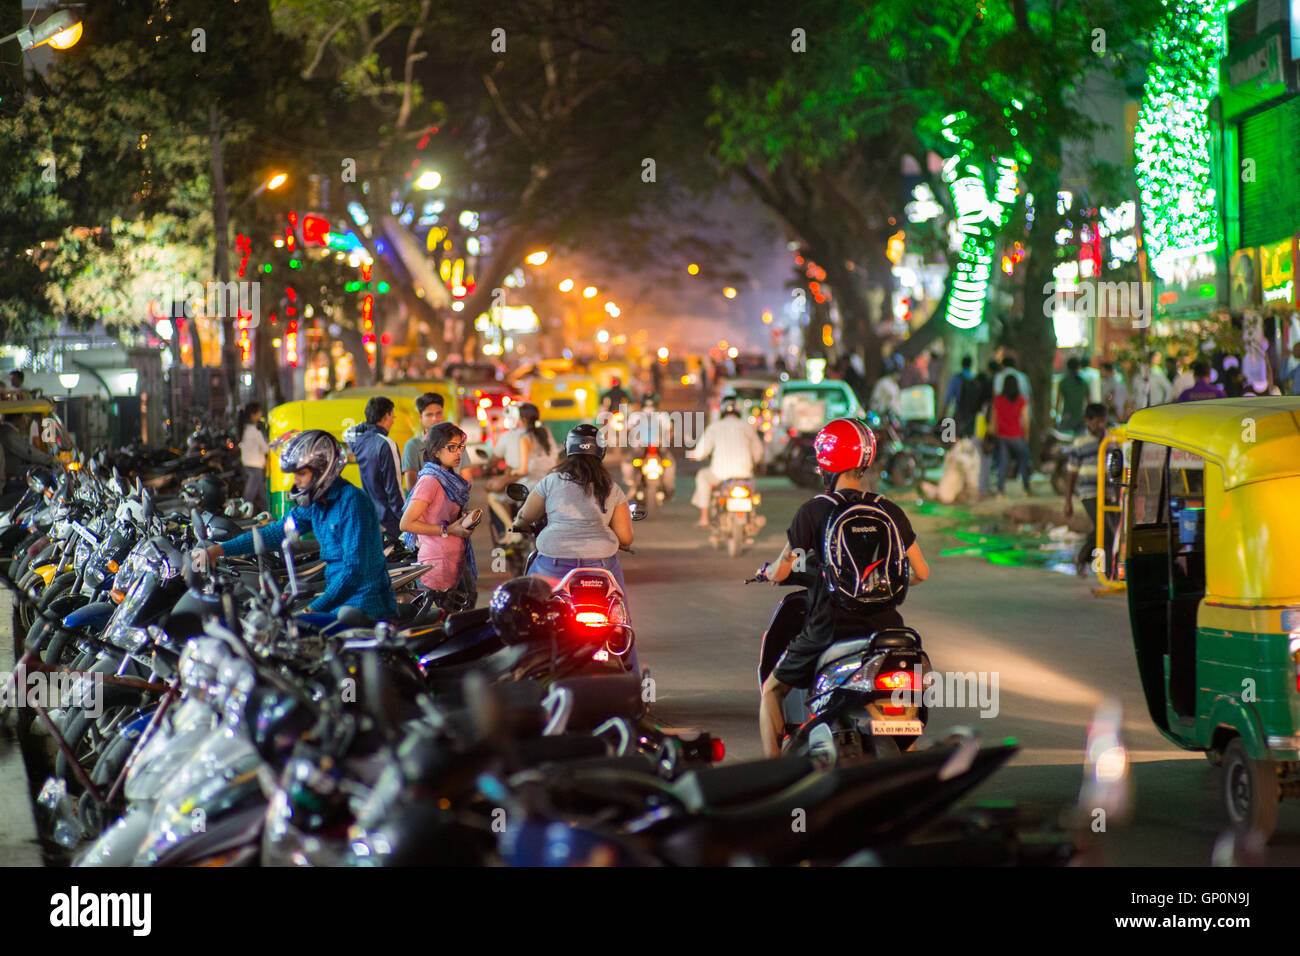 The street is filled with people and scooters in the popular party area at night in Bangalore, India Stock Photo